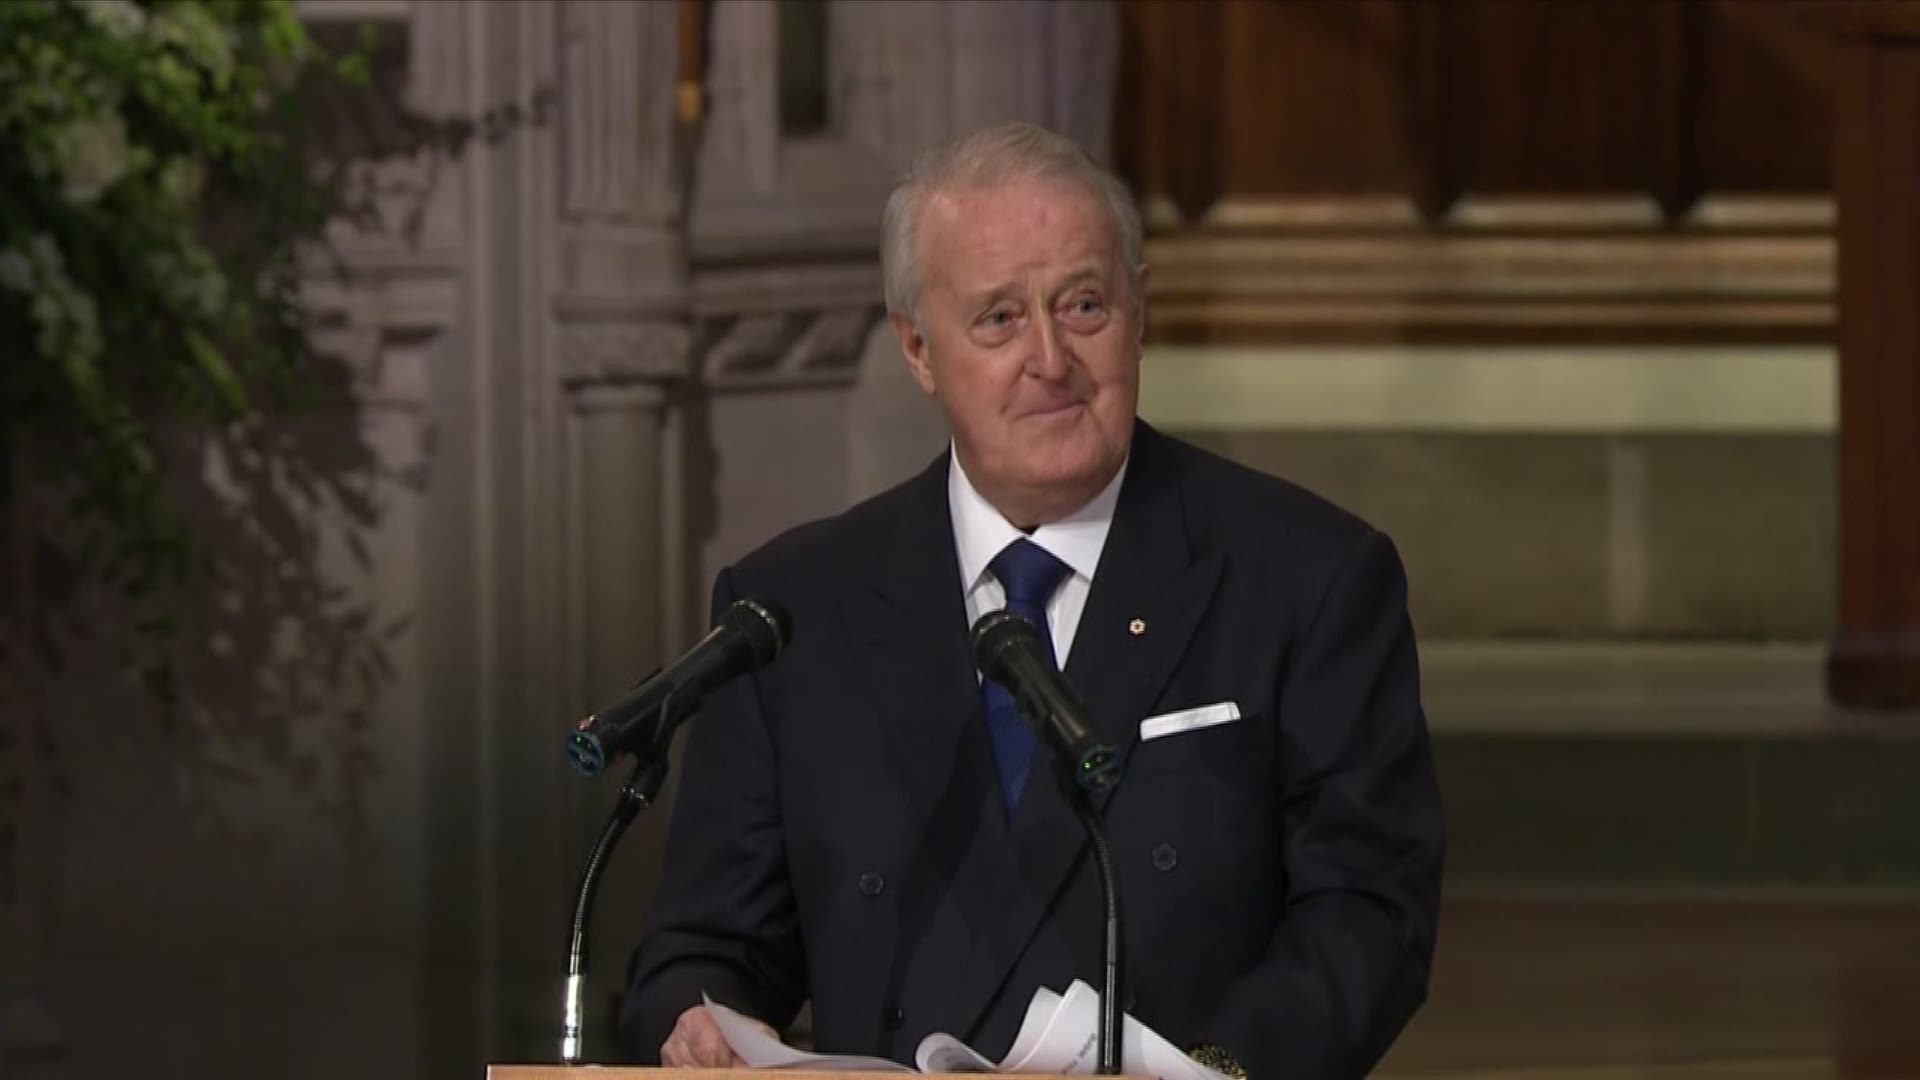 Mulroney, the Eighteenth Prime Minister of Canada, spoke at Bush's funeral at the Washington National Cathedral.